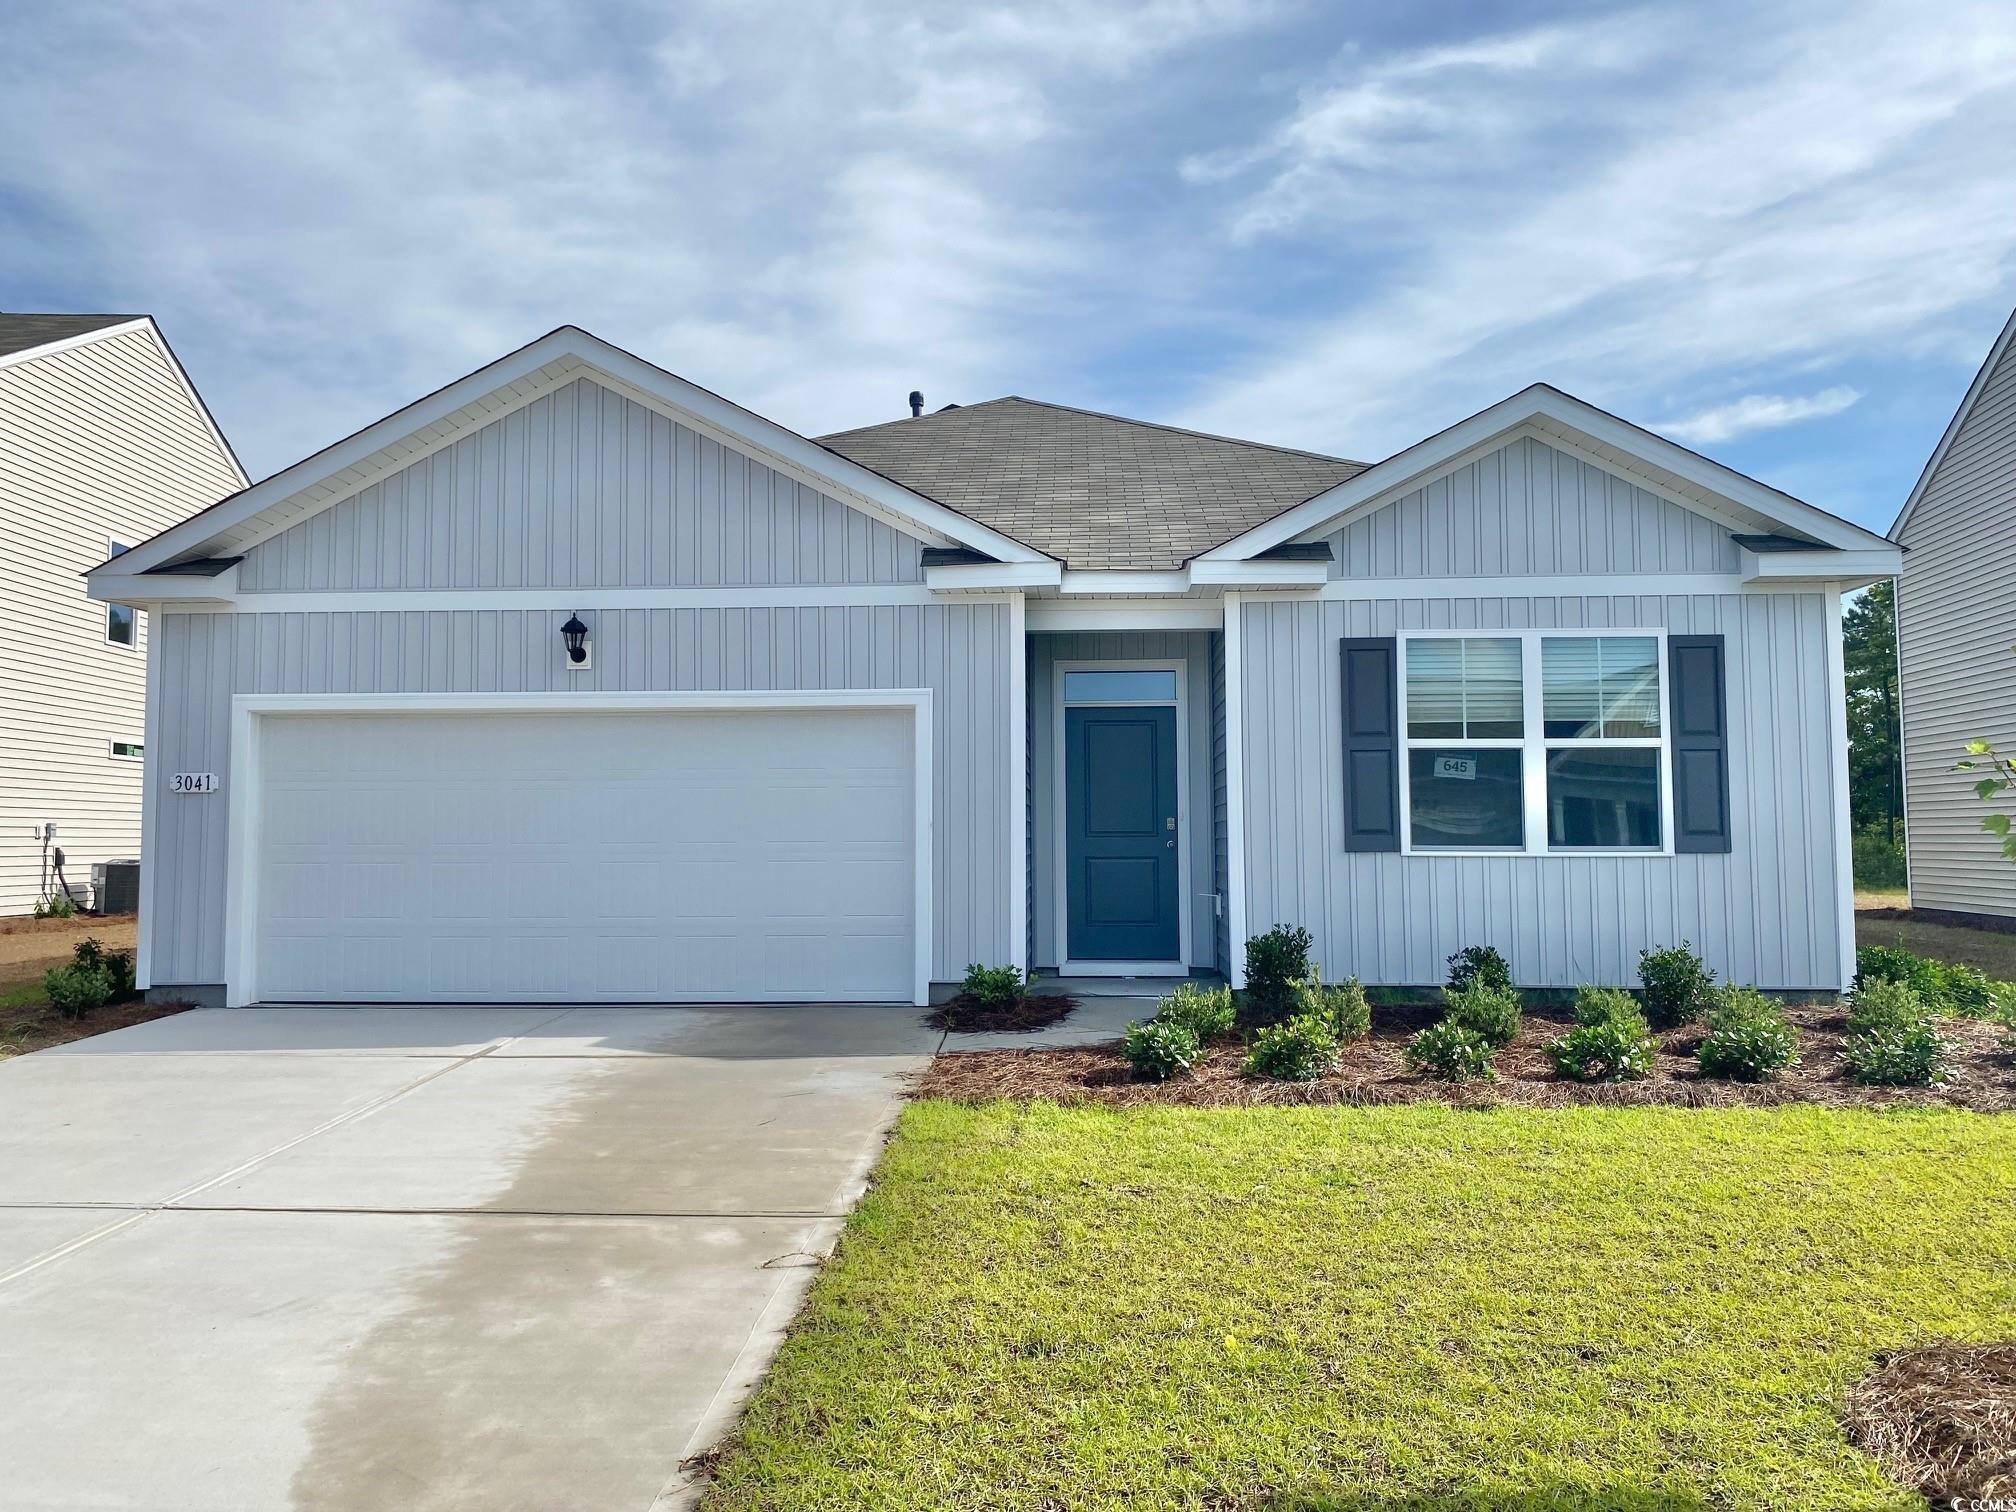 the perfect location; close to conway medical center, college, downtown conway, myrtle beach shops/restaurants and beaches. this new community offers a clubhouse, pool and fitness center! our cali plan is a thoughtfully designed one level home with a beautiful, open concept living area that is perfect for entertaining. the kitchen features granite countertops, an oversized island, 36" cabinetry, a walk-in pantry, and stainless appliances. the large owner's suite is tucked away at the back of the home, separated from the other bedrooms, with a walk-in closet and spacious en suite bath with a double vanity, 5' shower, and separate linen closet. spacious covered rear porch adds additional outdoor living space. this is america's smart home! each of our homes comes with an industry leading smart home package that will allow you to control the thermostat, front door light and lock, and video doorbell from your smartphone or with voice commands to alexa. *photos are of a similar cali home.  (home and community information, including pricing, included features, terms, availability and amenities, are subject to change prior to sale at any time without notice or obligation. square footages are approximate. pictures, photographs, colors, features, and sizes are for illustration purposes only and will vary from the homes as built. equal housing opportunity builder.)